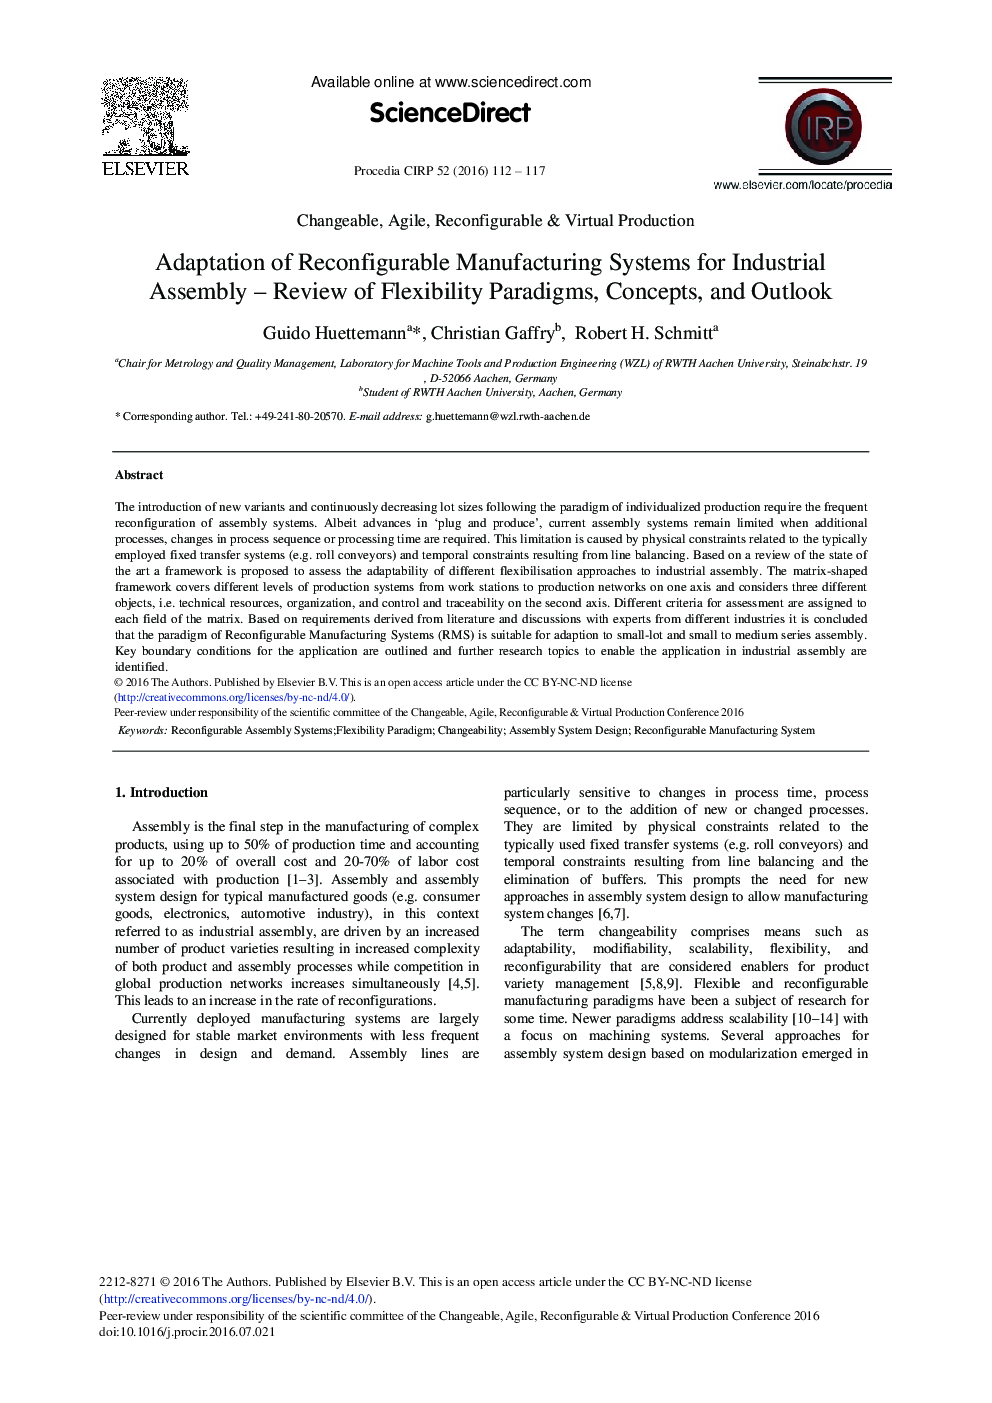 Adaptation of Reconfigurable Manufacturing Systems for Industrial Assembly – Review of Flexibility Paradigms, Concepts, and Outlook 